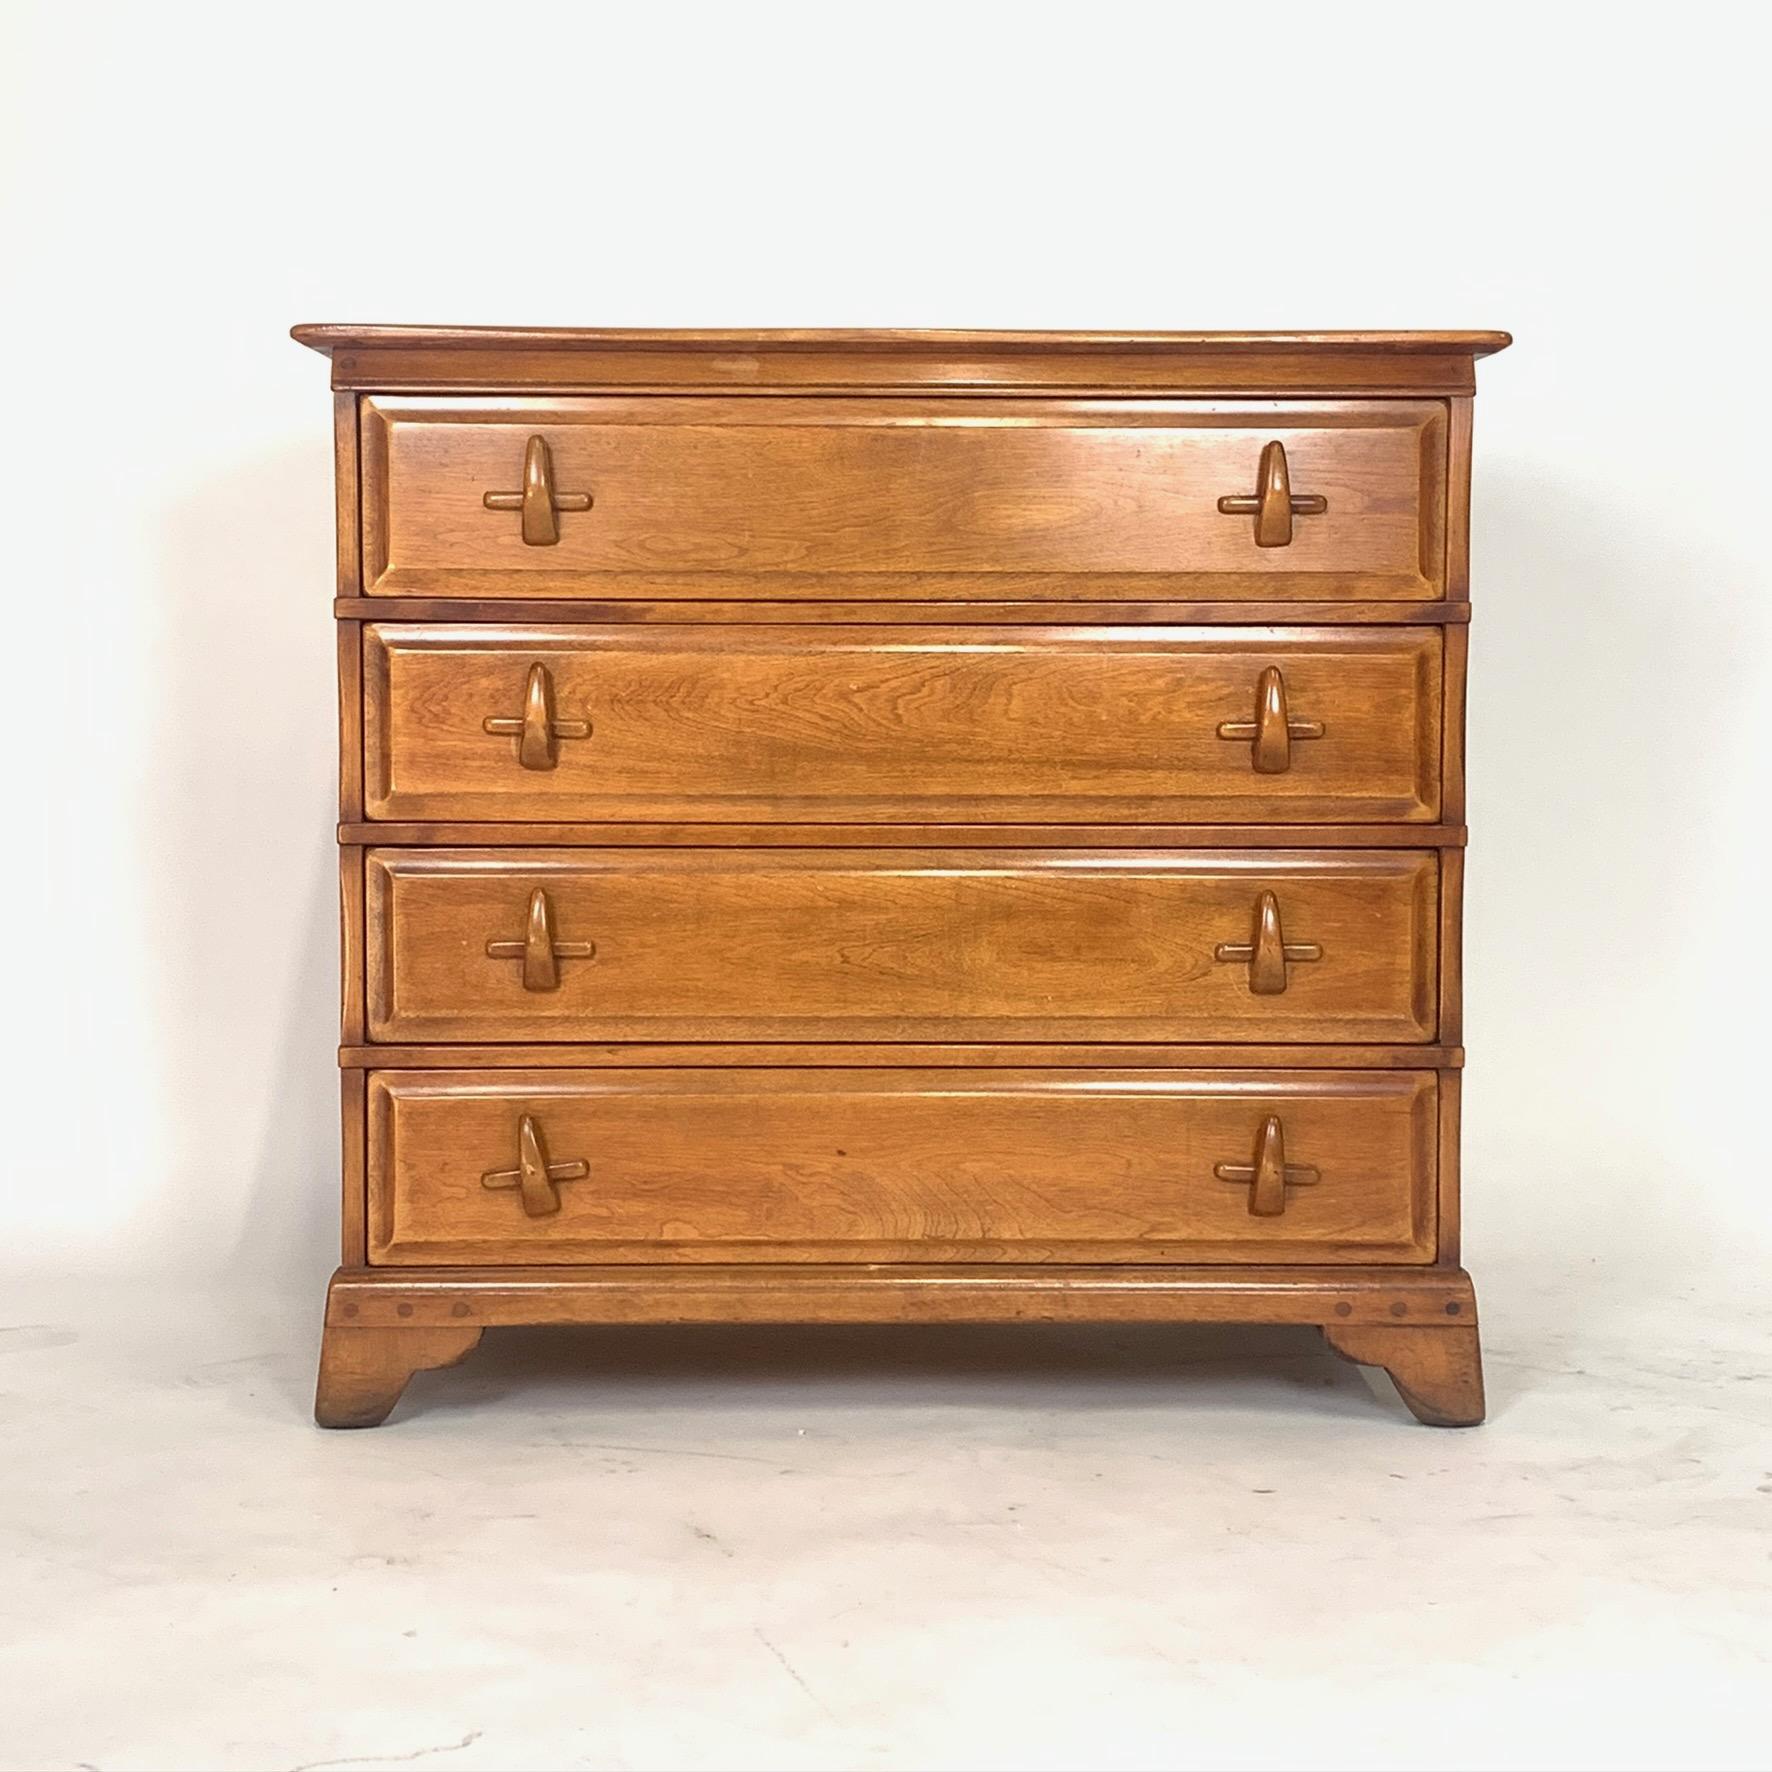 20th Century American Craft Hard Rock Maple 4 Drawer Dresser with Sculptural Pulls by Sikes